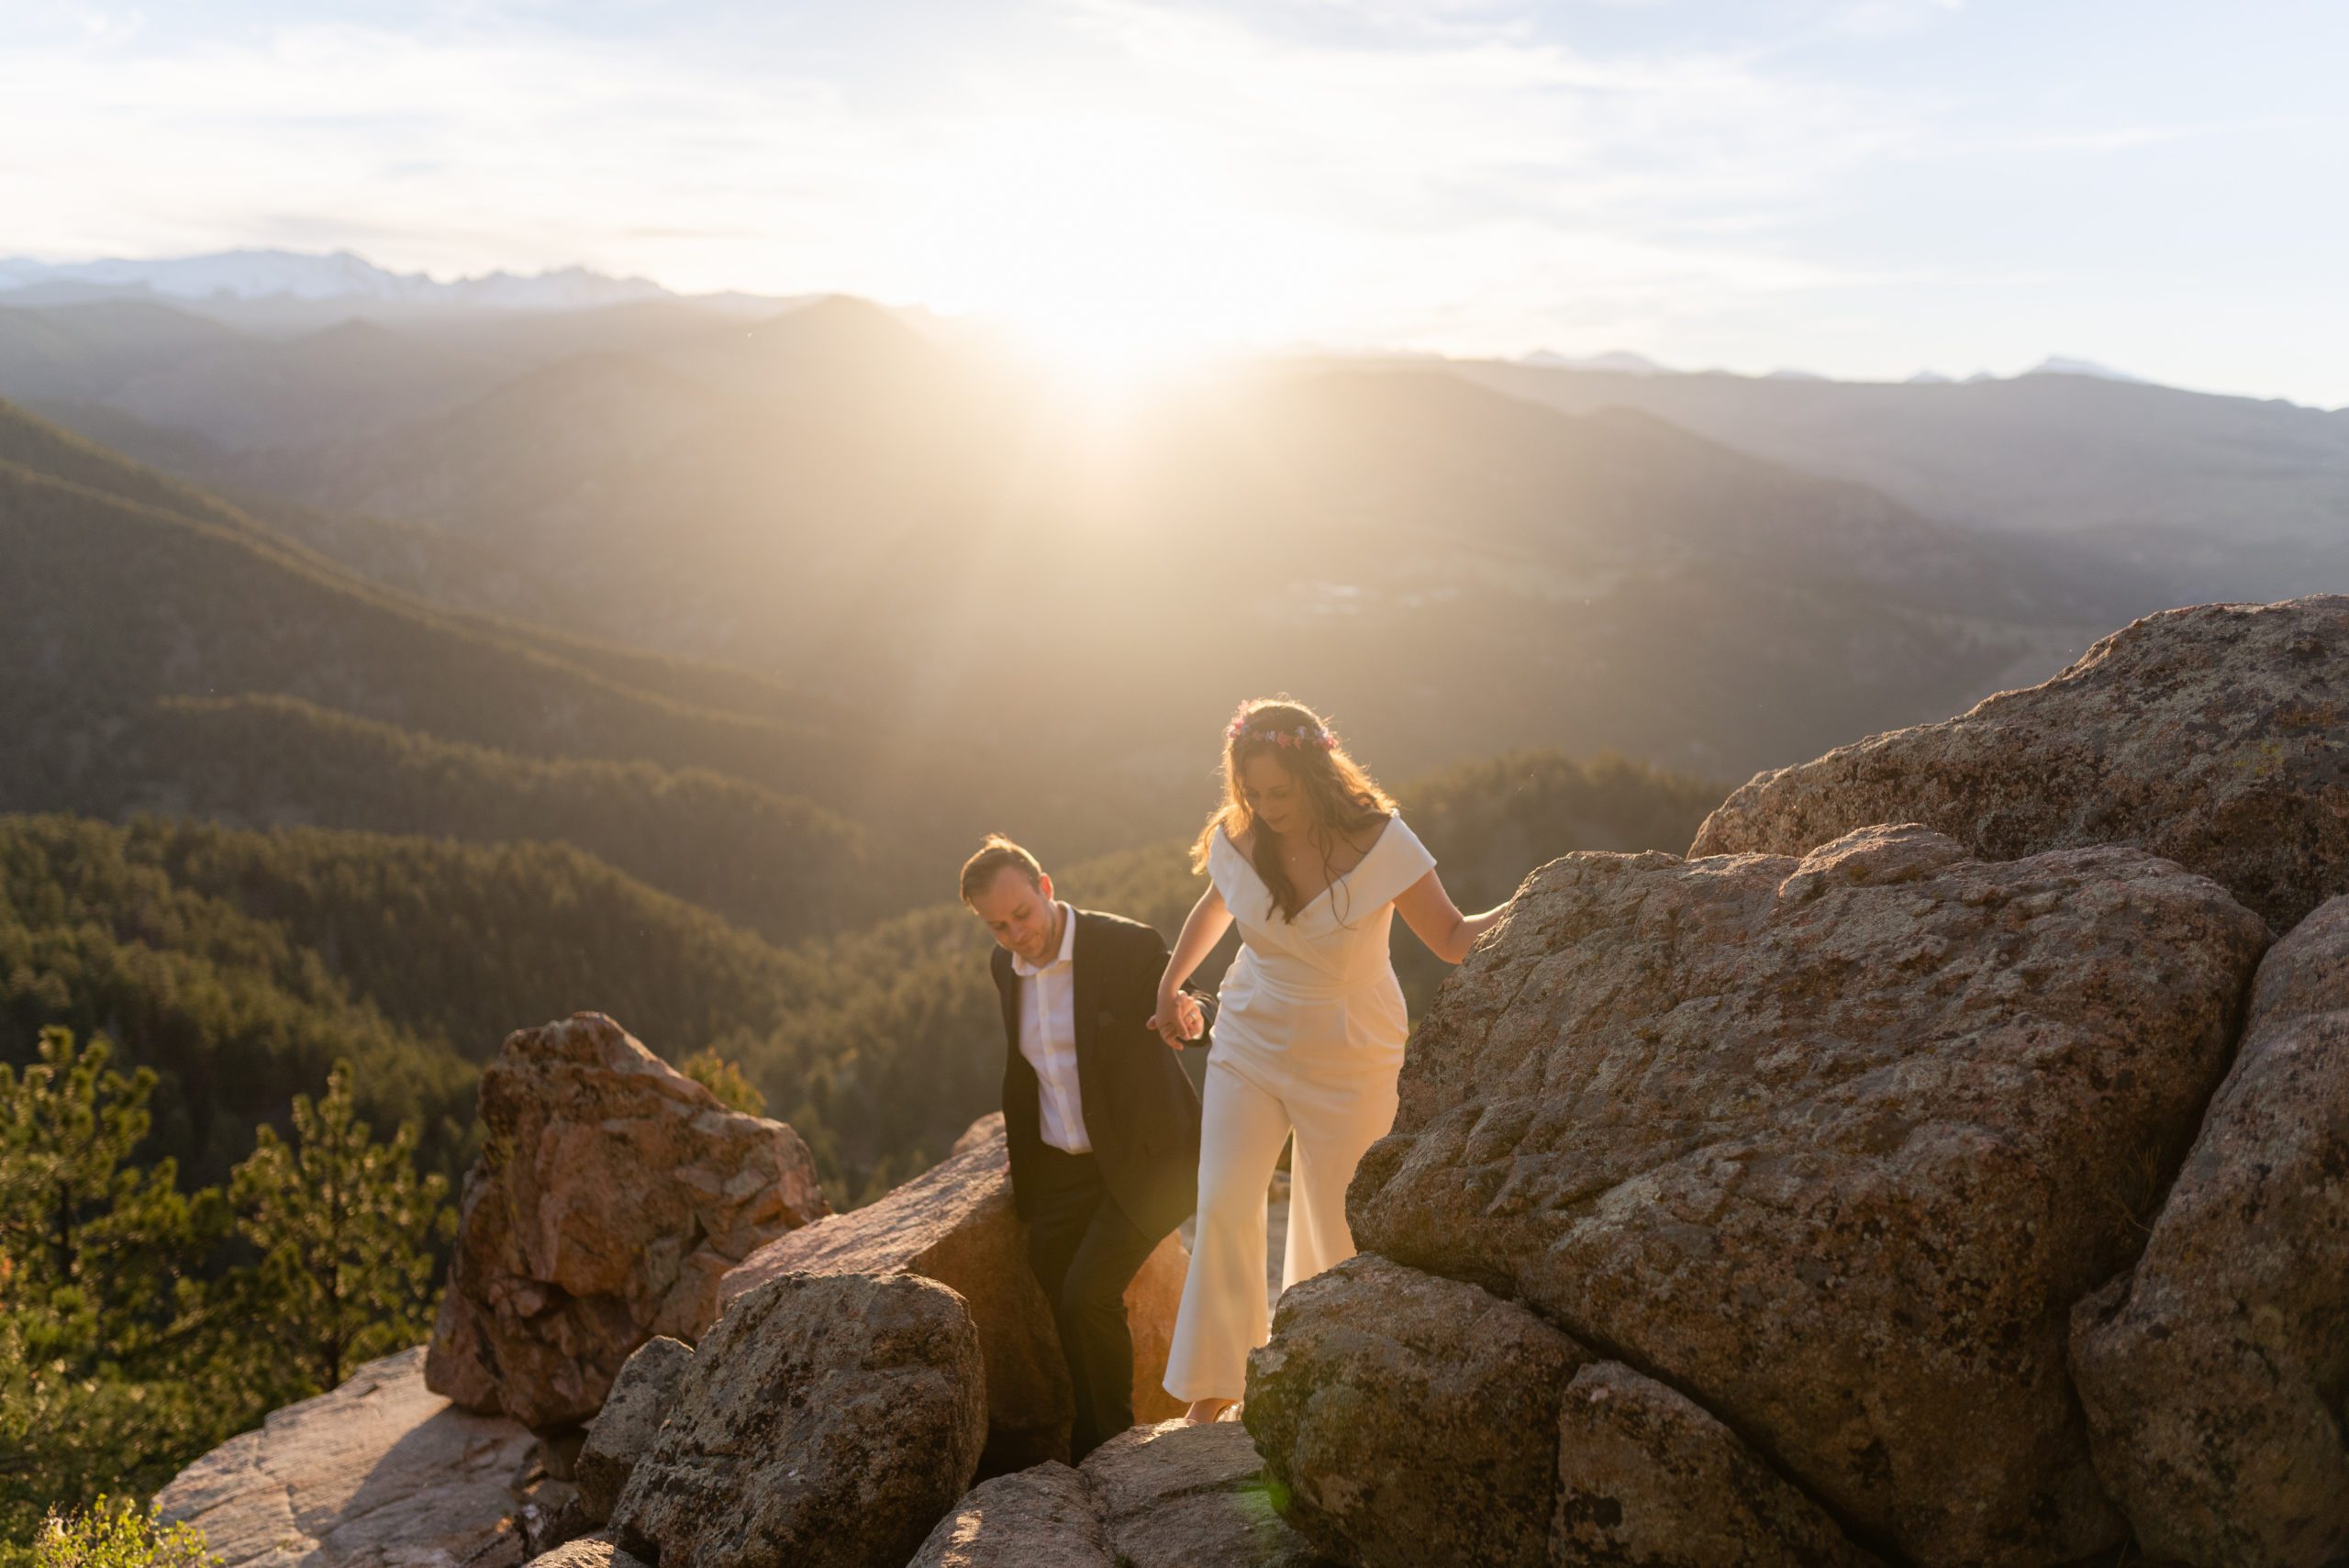 The bride and groom exploring the cliffside during their Boulder Hiking elopement near Realization point. 